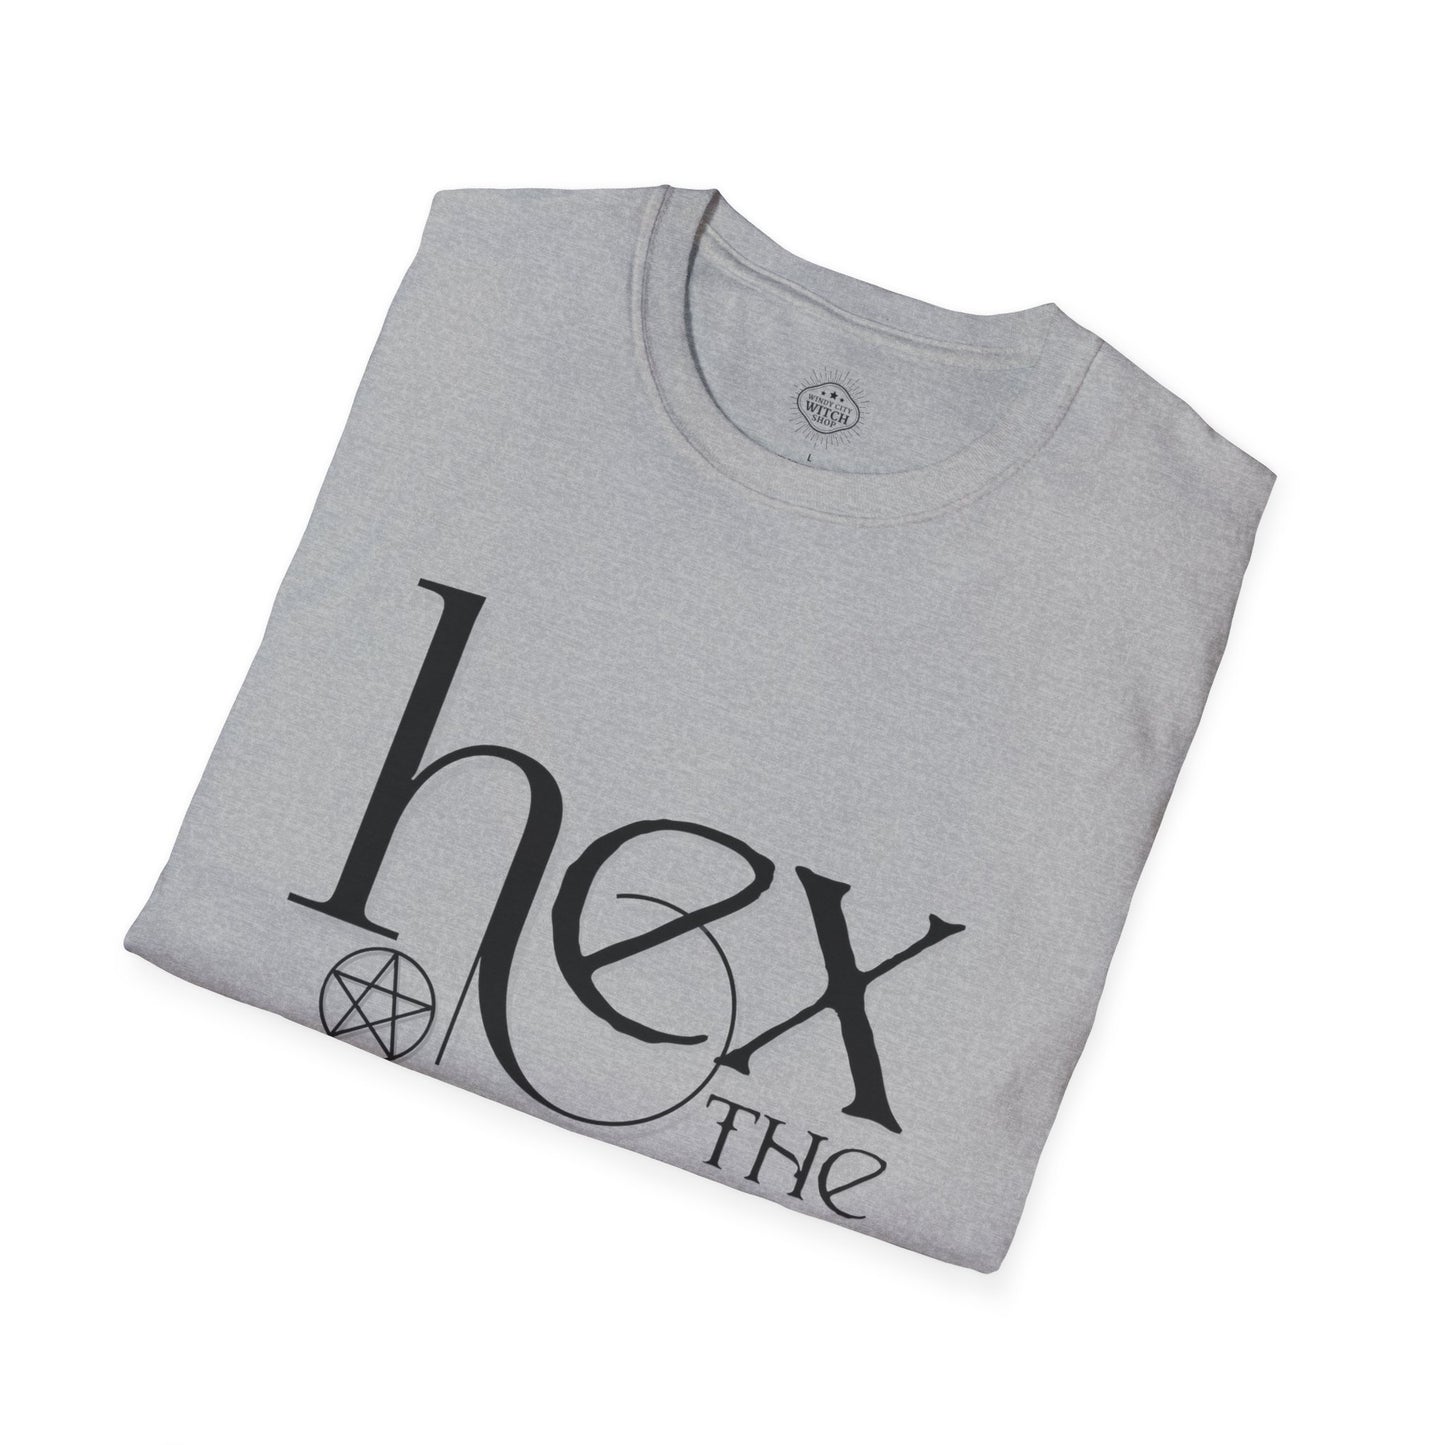 Hex the Patriarchy Unisex T-Shirt